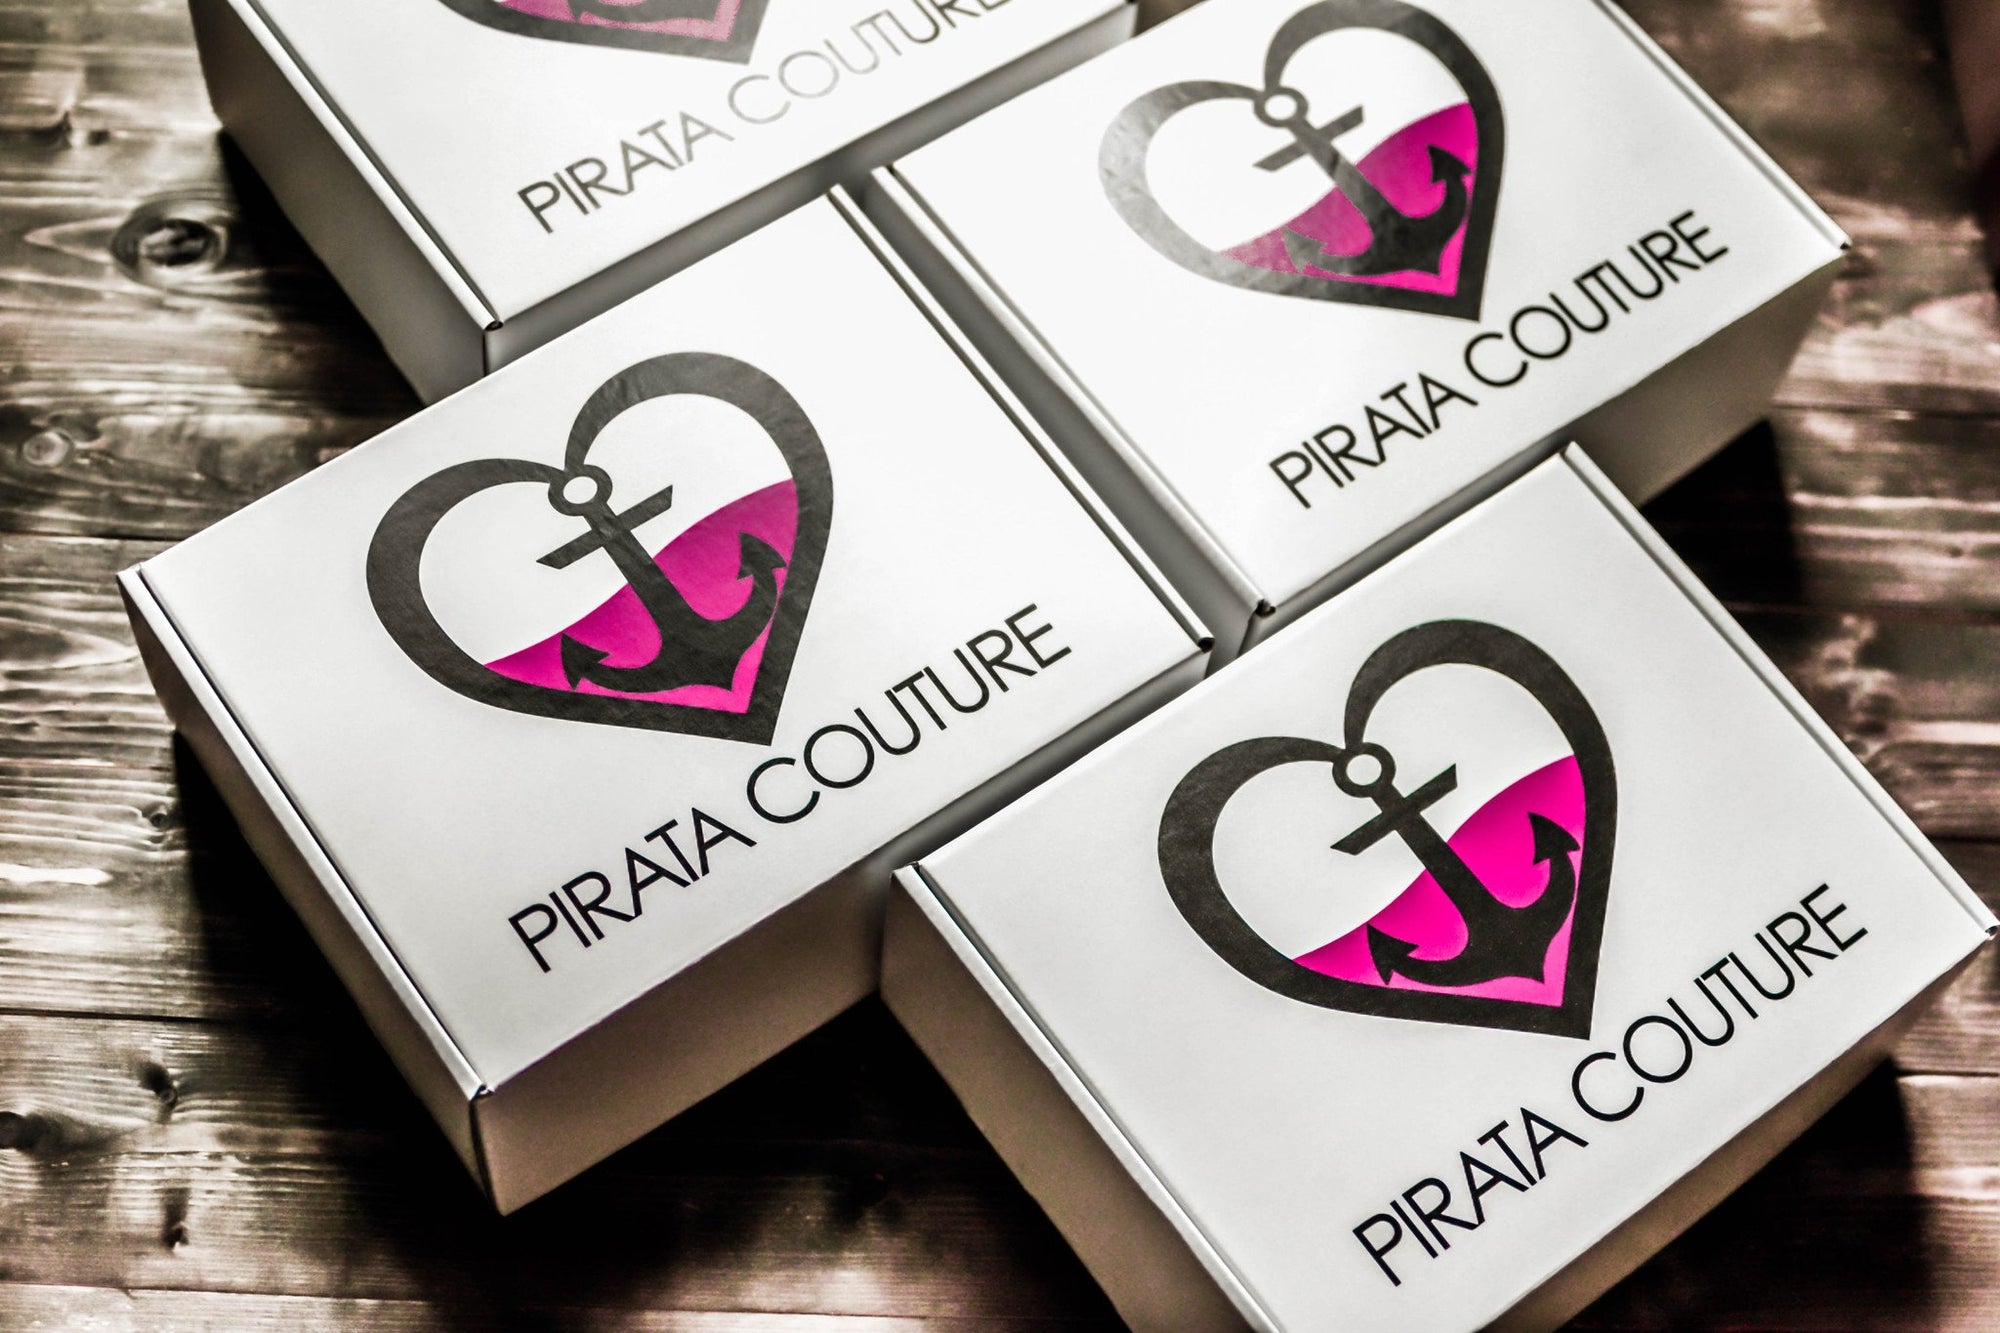 Pirata Couture launches "Treasure Chest" a monthly intimates subscription service!